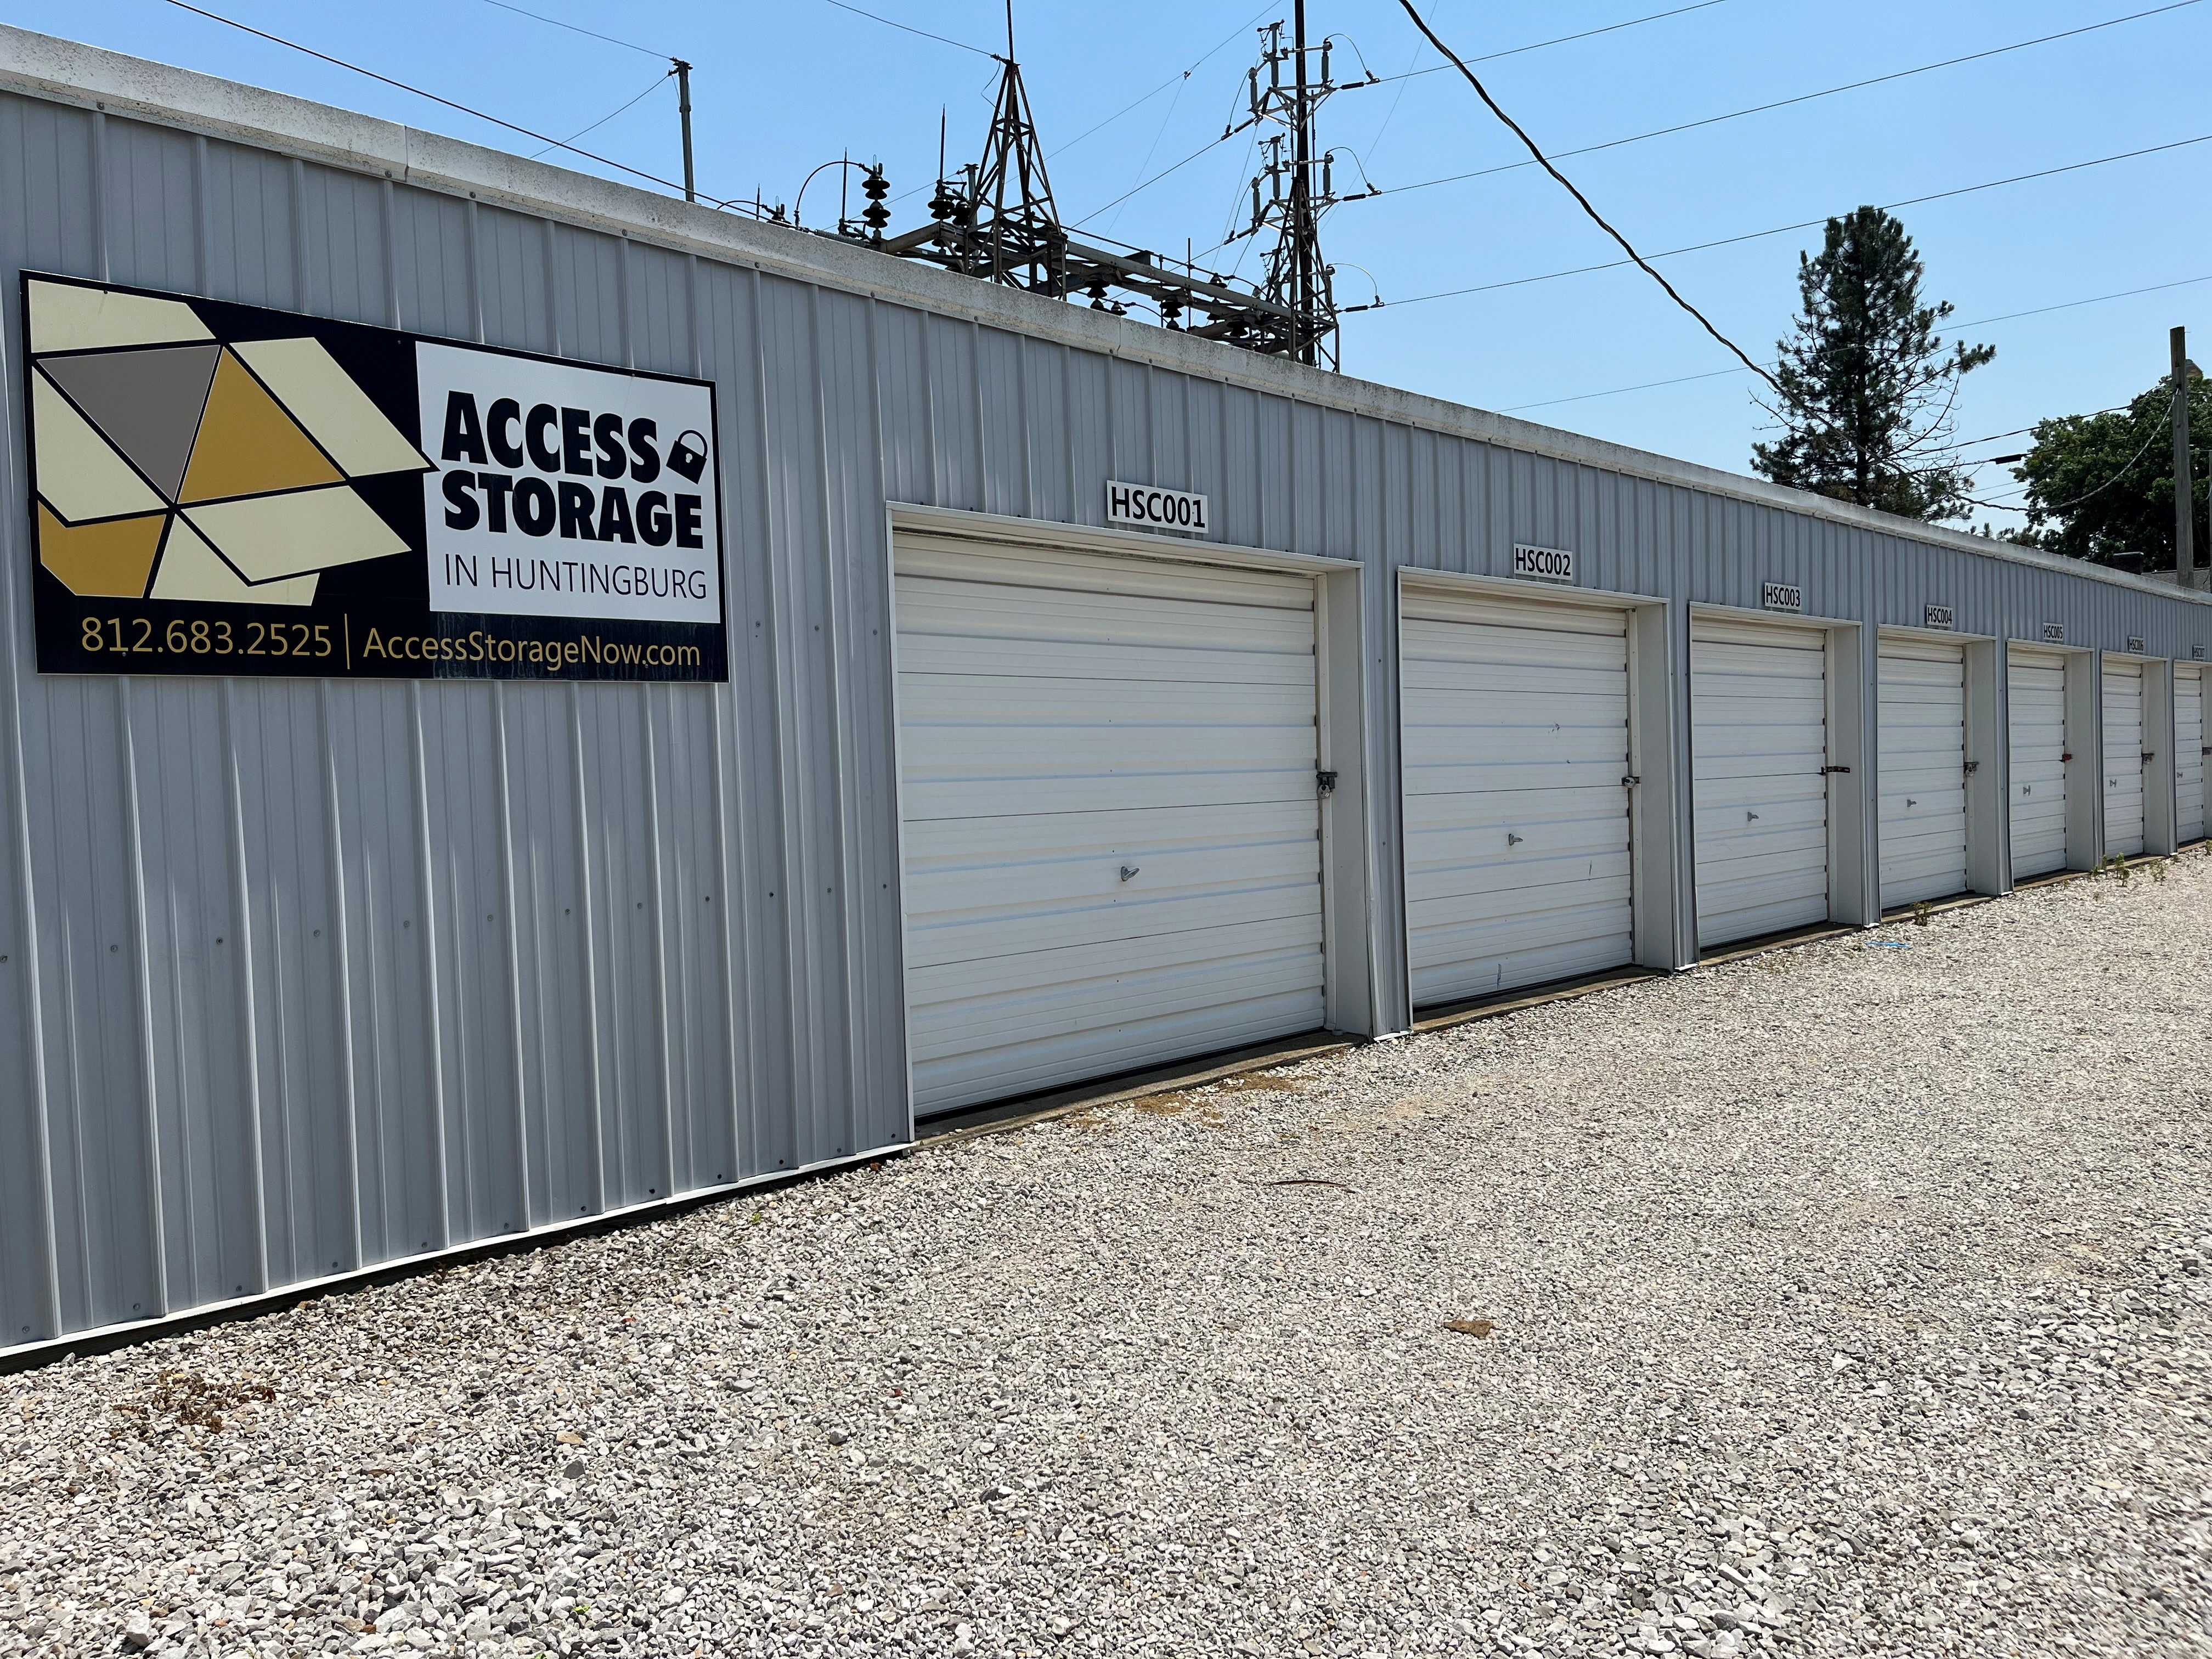 Secure, white-door storage units in Huntingburg with smooth paved driveways for easy drive-up access.